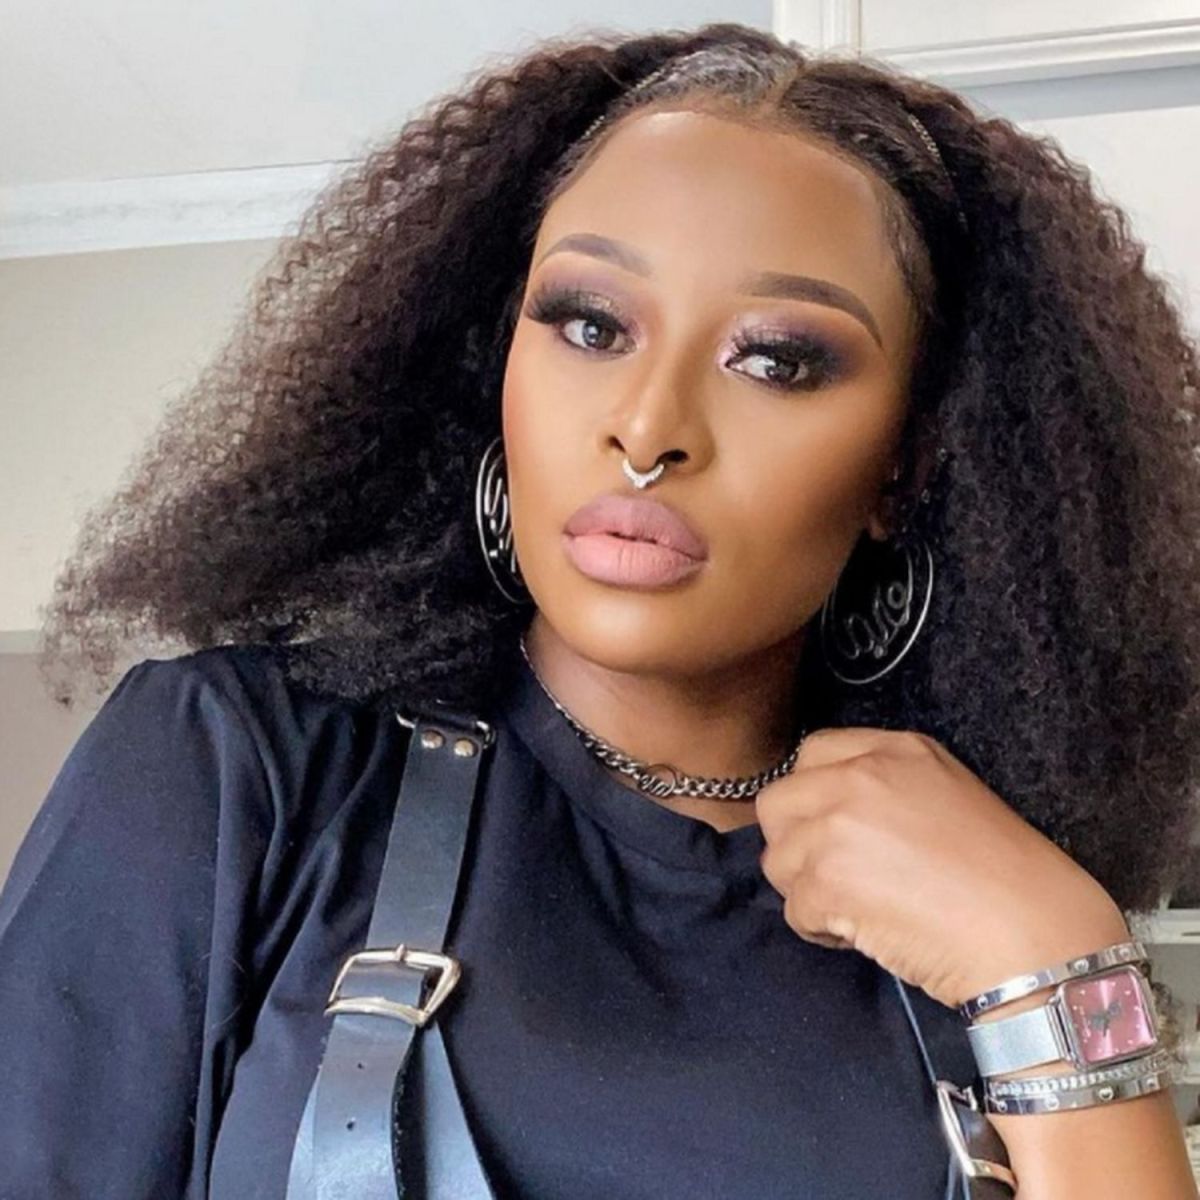 Dj Zinhle Reacts To Backlash Over Not Knowing How To Cook 2